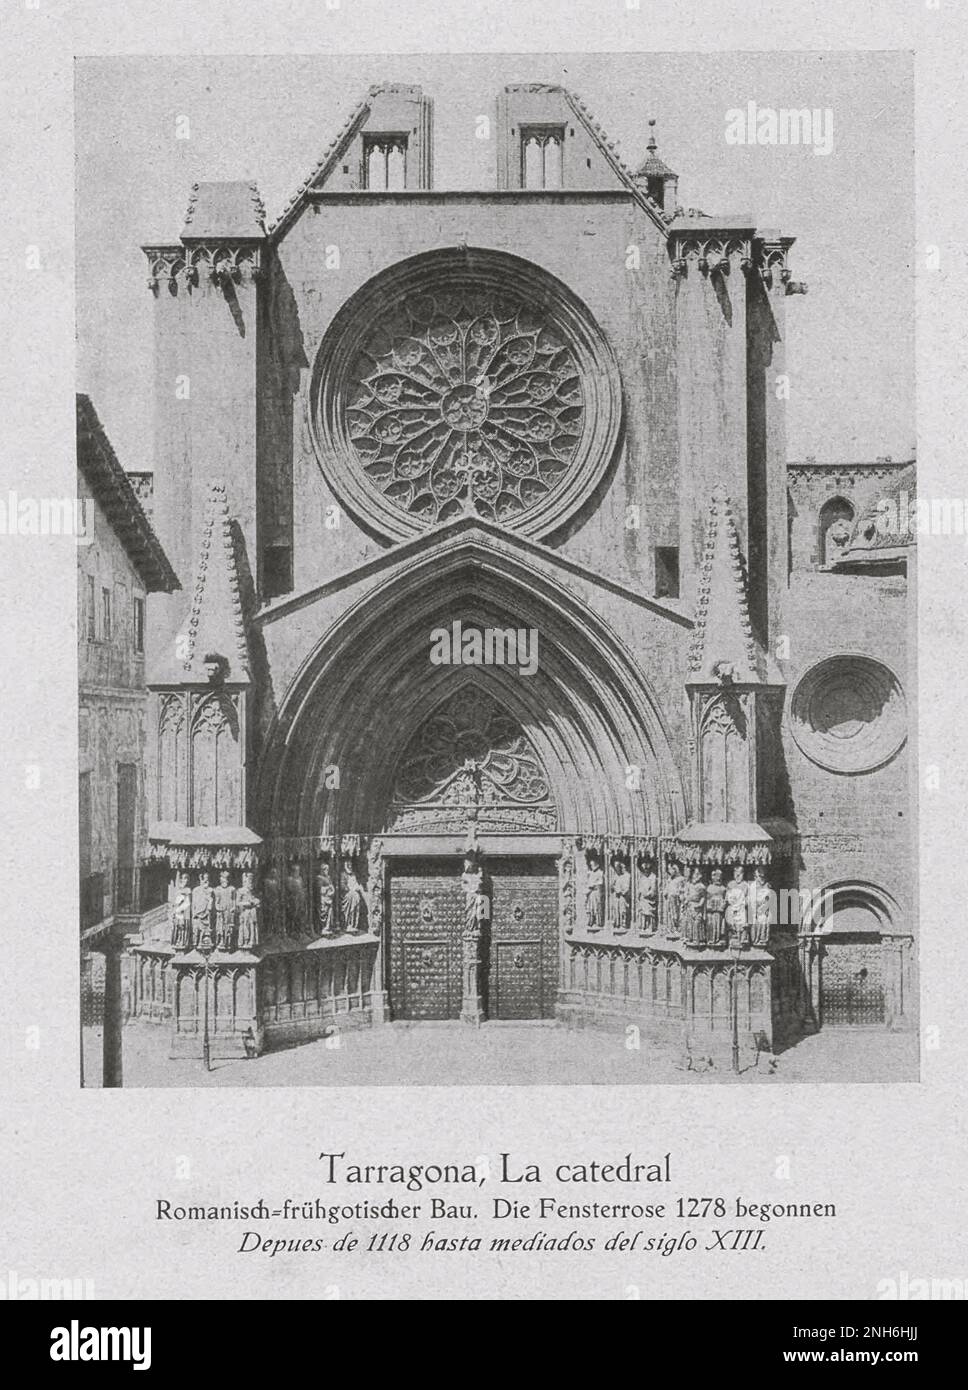 Architecture of Old Spain. Vintage photo of Tarragona Cathedral. The Cathedral of Tarragona is a Roman Catholic church in Tarragona, Catalonia, Spain. The edifice is located in a site previously occupied by a Roman temple dating to the time of Tiberius, a Visigothic cathedral, and a Moorish mosque. Stock Photo